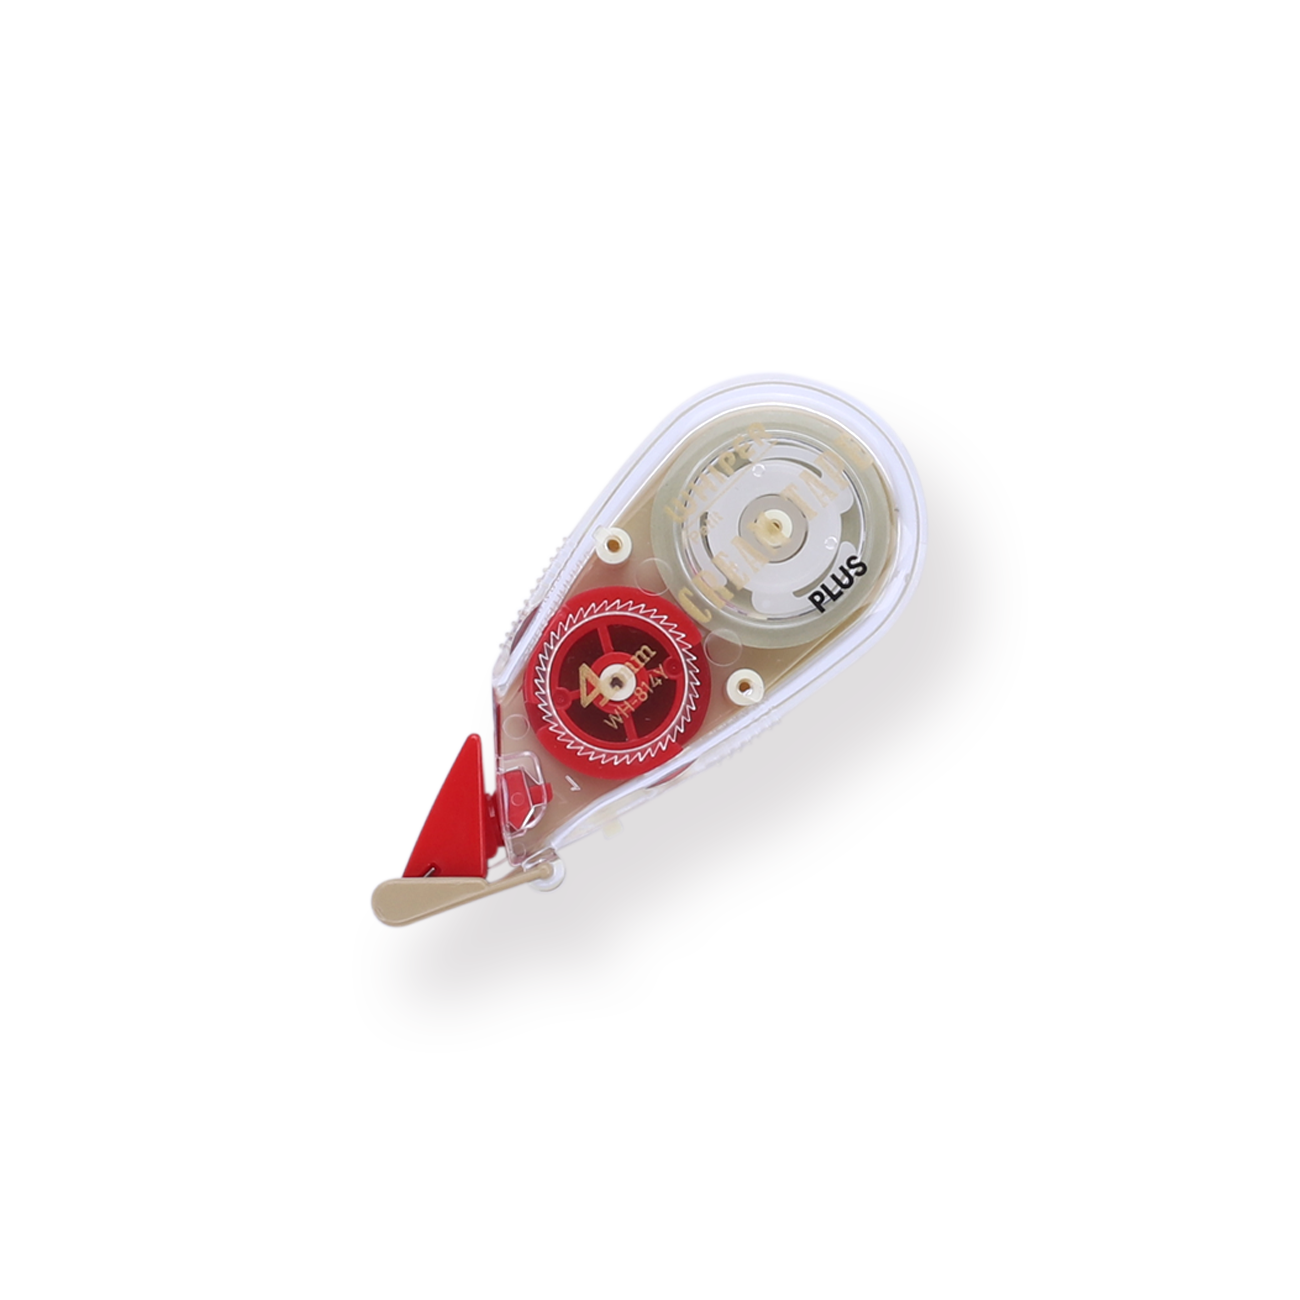 Plus Whiper Cream Correction Tape - Red - Stationery Pal